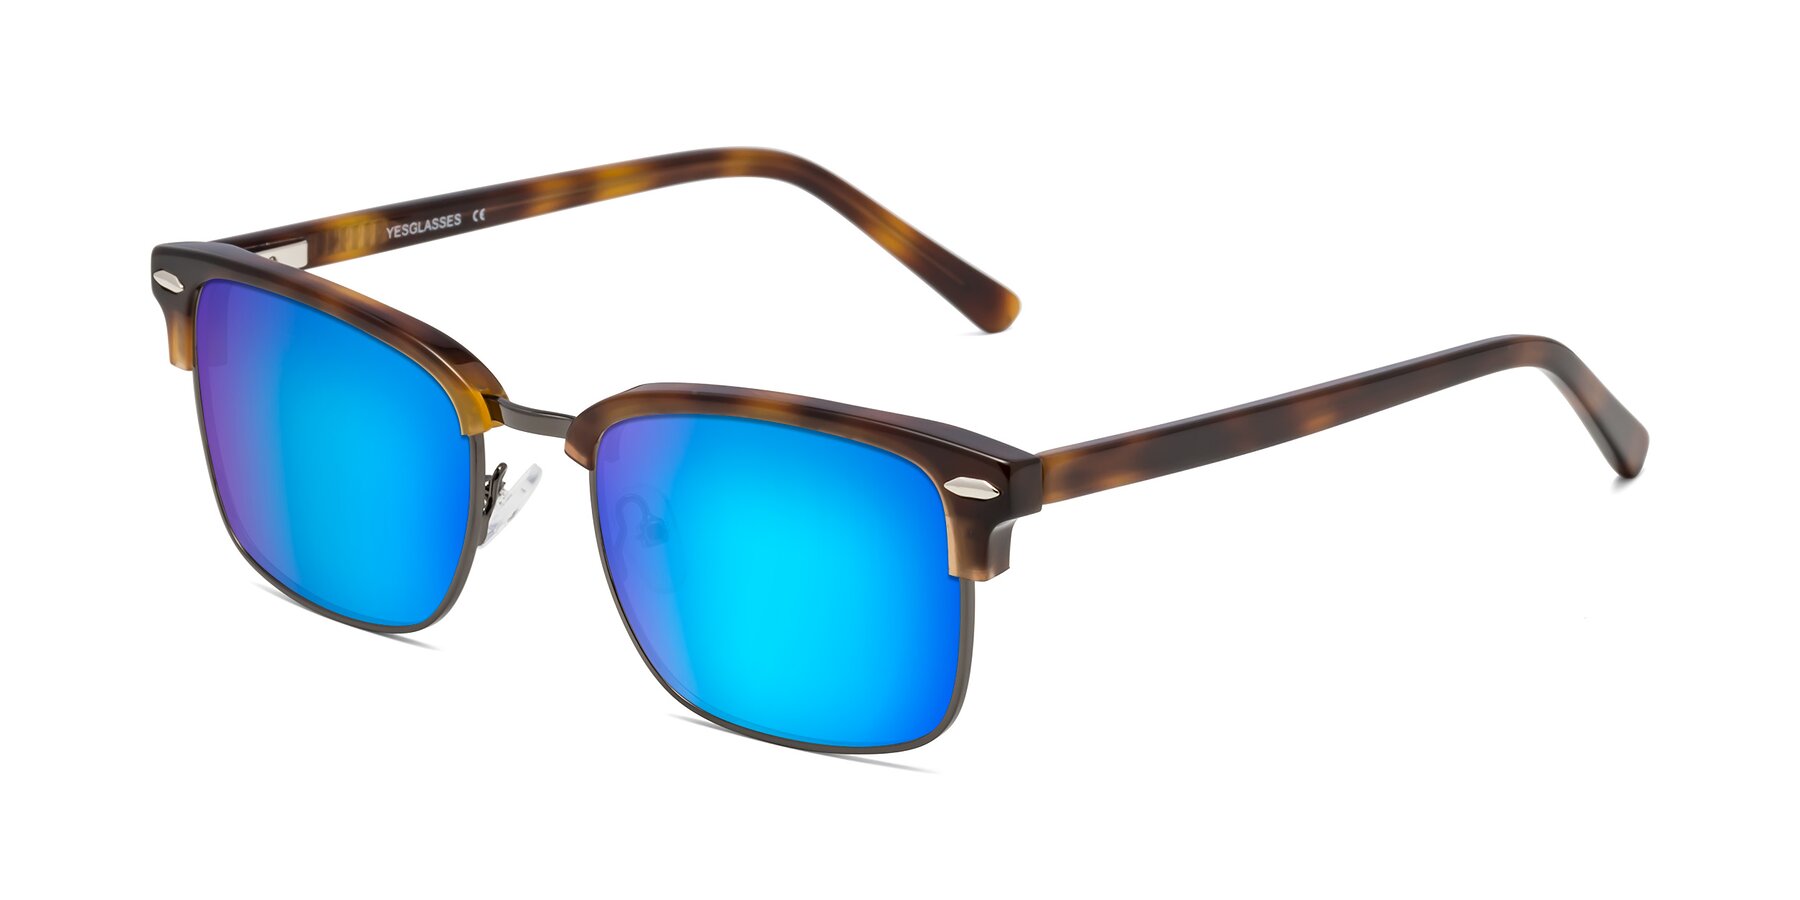 Angle of 17464 in Tortoise/ Gunmetal with Blue Mirrored Lenses